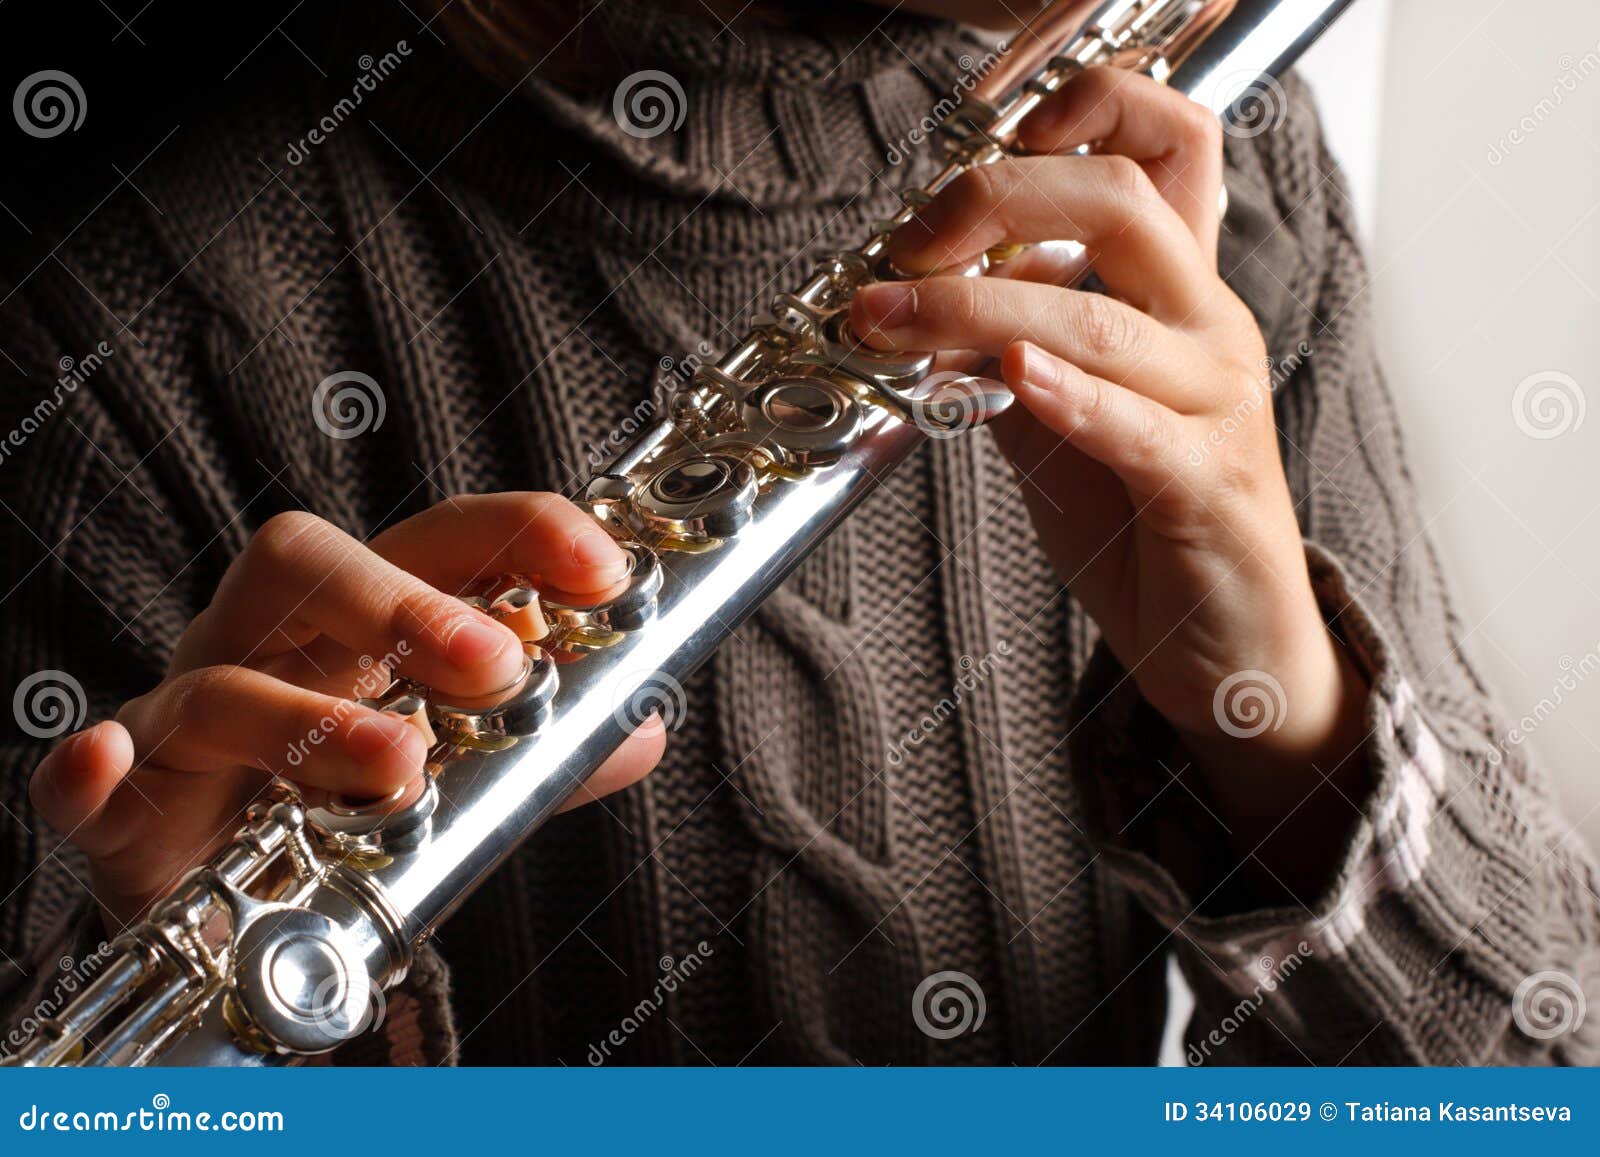 Girl Playing Flute Stock Image Image Of Orchestra Instrument 34106029